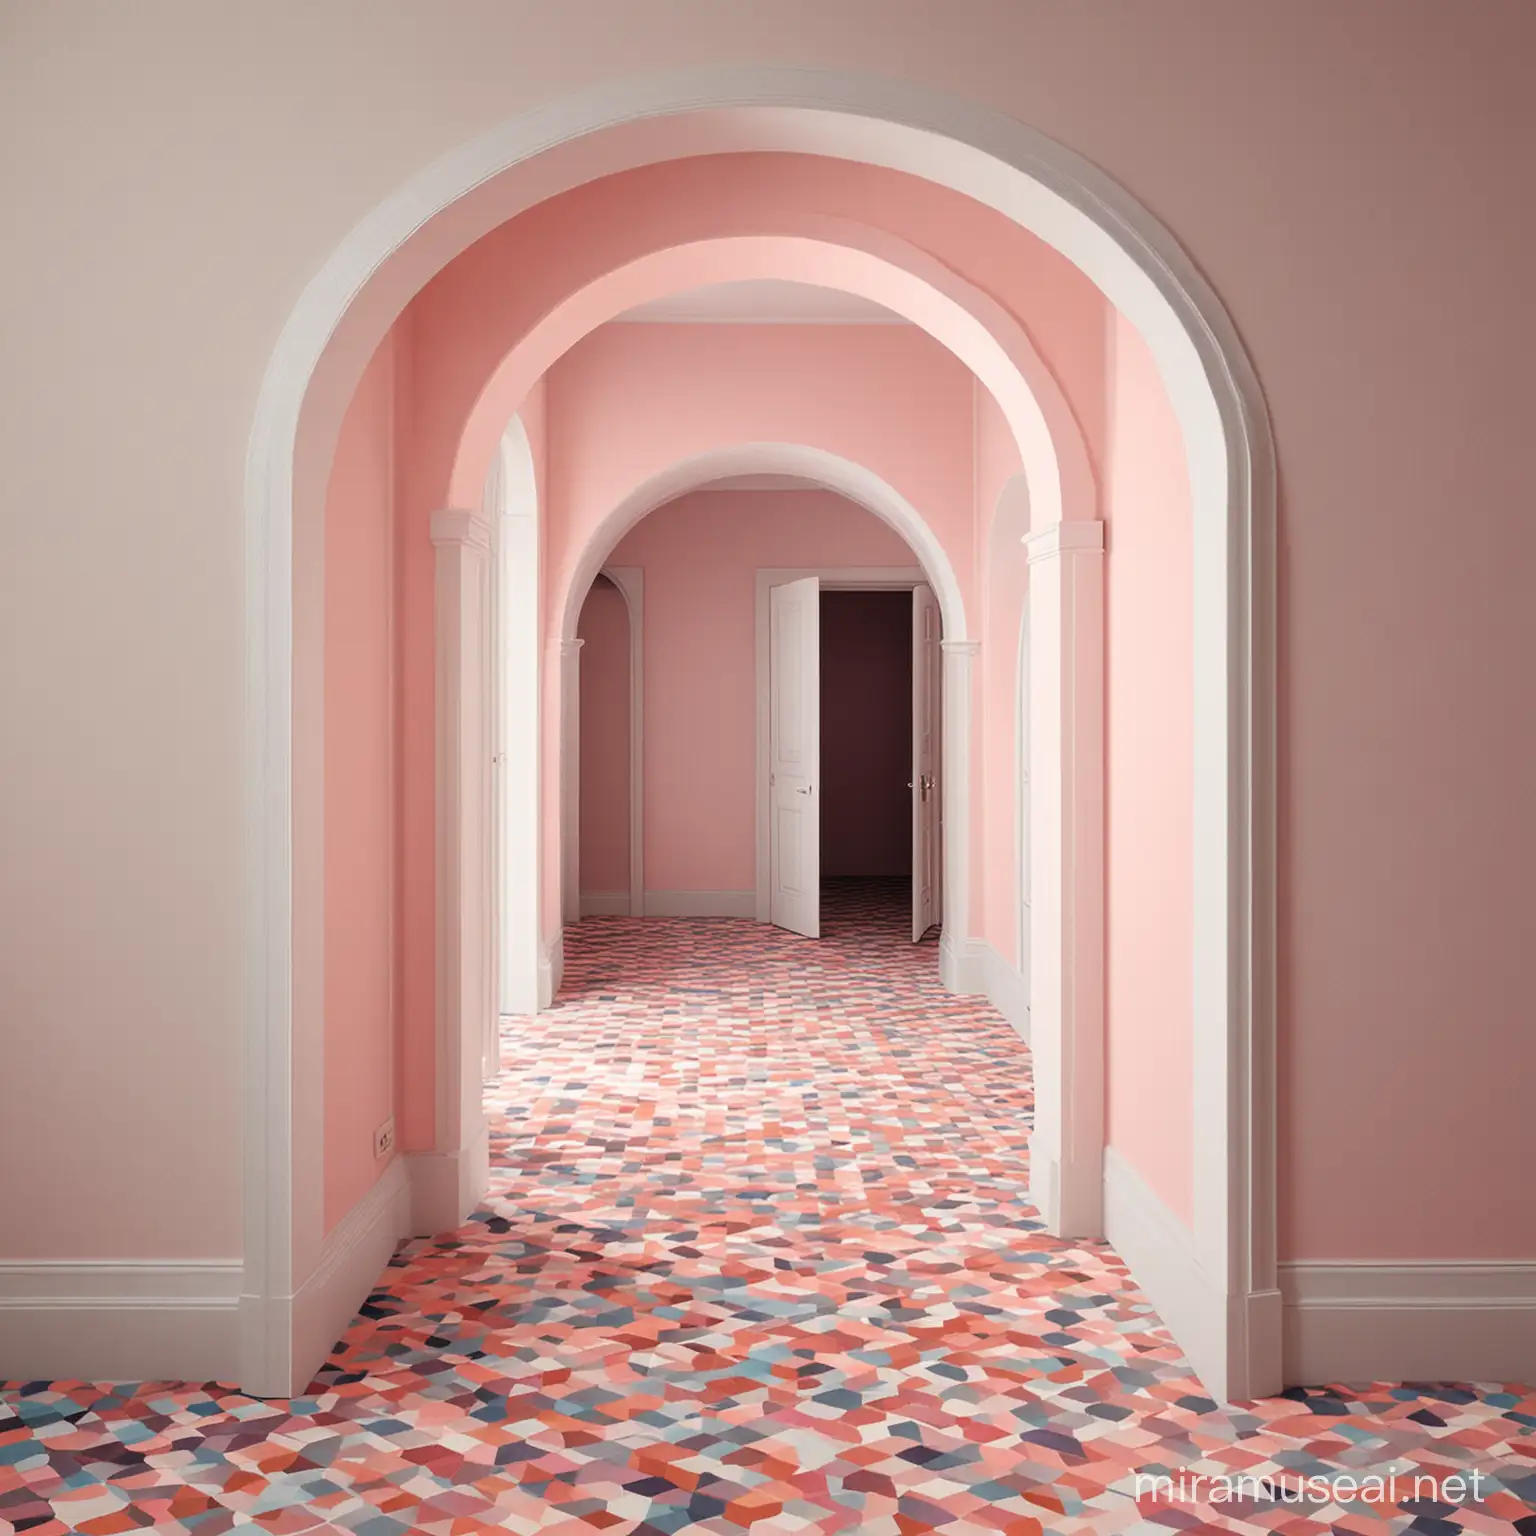 CREATE A HYPNOTIC OPTICAL ILLUSION THAT PLAYS WITH PERSPECTIVE AND DEPTH, FEATURING GEOMETRIC SHAPES AND PATTERNS THAT SEEM TO SHIFT AND TRANSFORM, THE VIBRANT PASTEL COLORS SEAMLESSLY BLENDING AND SHIFTING TO CREATE A MESMERIZING VISUAL EXPERIENCE OF A DOORWAY WITHIN A DOORWAY WITHIN A DOORWAY, STAIRWAYS AND SECRET PASSAGES